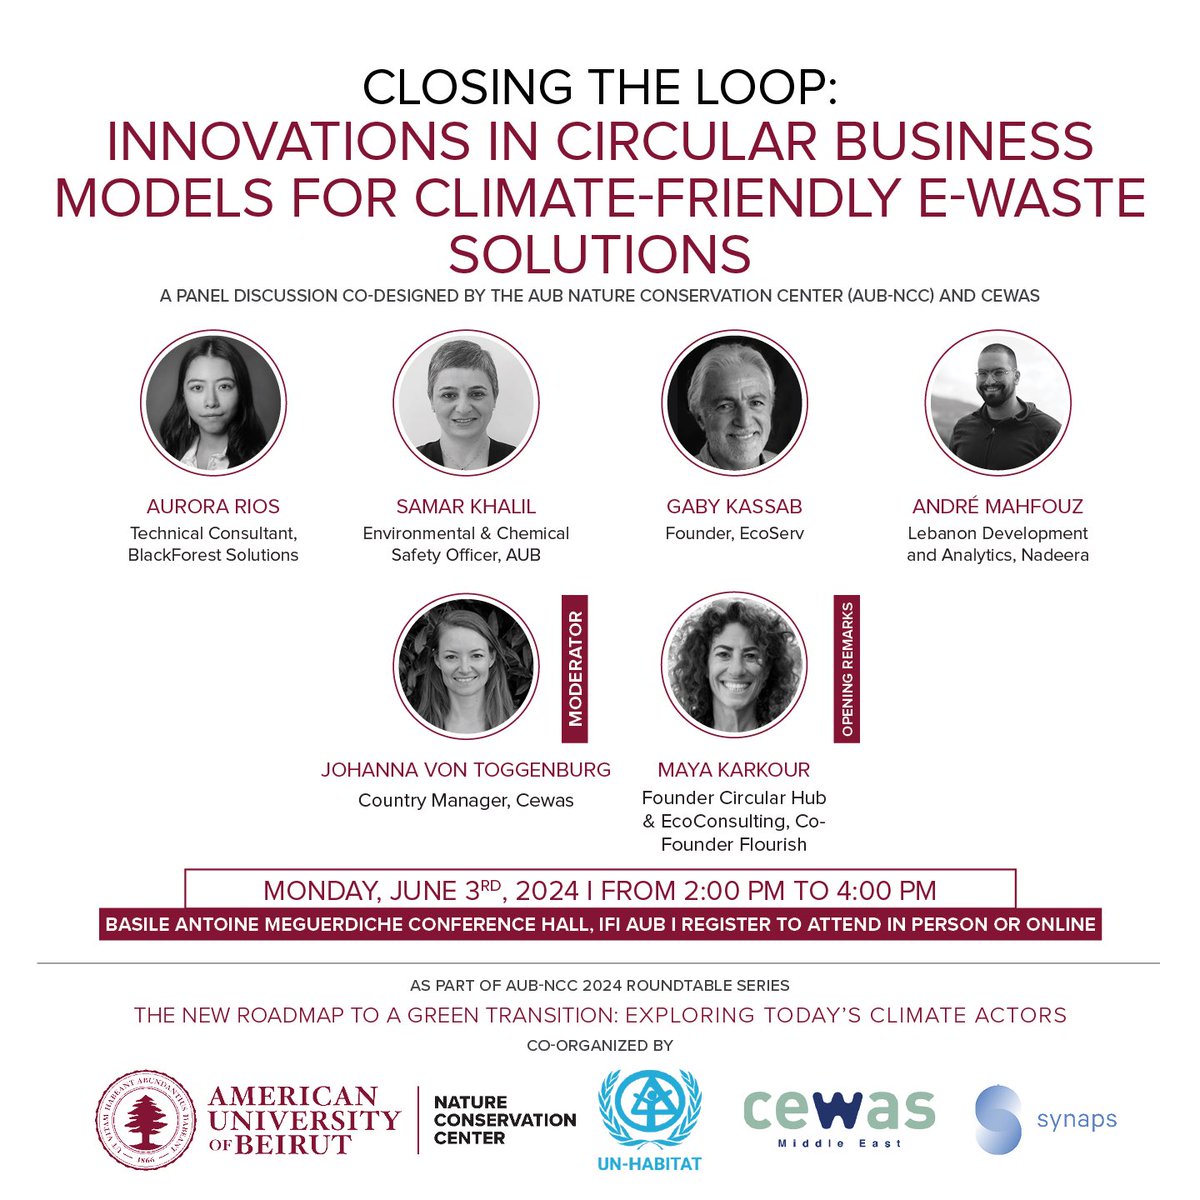 Join us and @CewasGlobal for the second roundtable of AUB-NCC’s 2024 series “The New Roadmap to a #GreenTransition: Exploring Today’s #Climate Actors”. 🗓️ Monday, June 3rd ⏰2:00pm 📍@ifi_aub conference hall 🔗 forms.office.com/r/L9mWeWEWEx